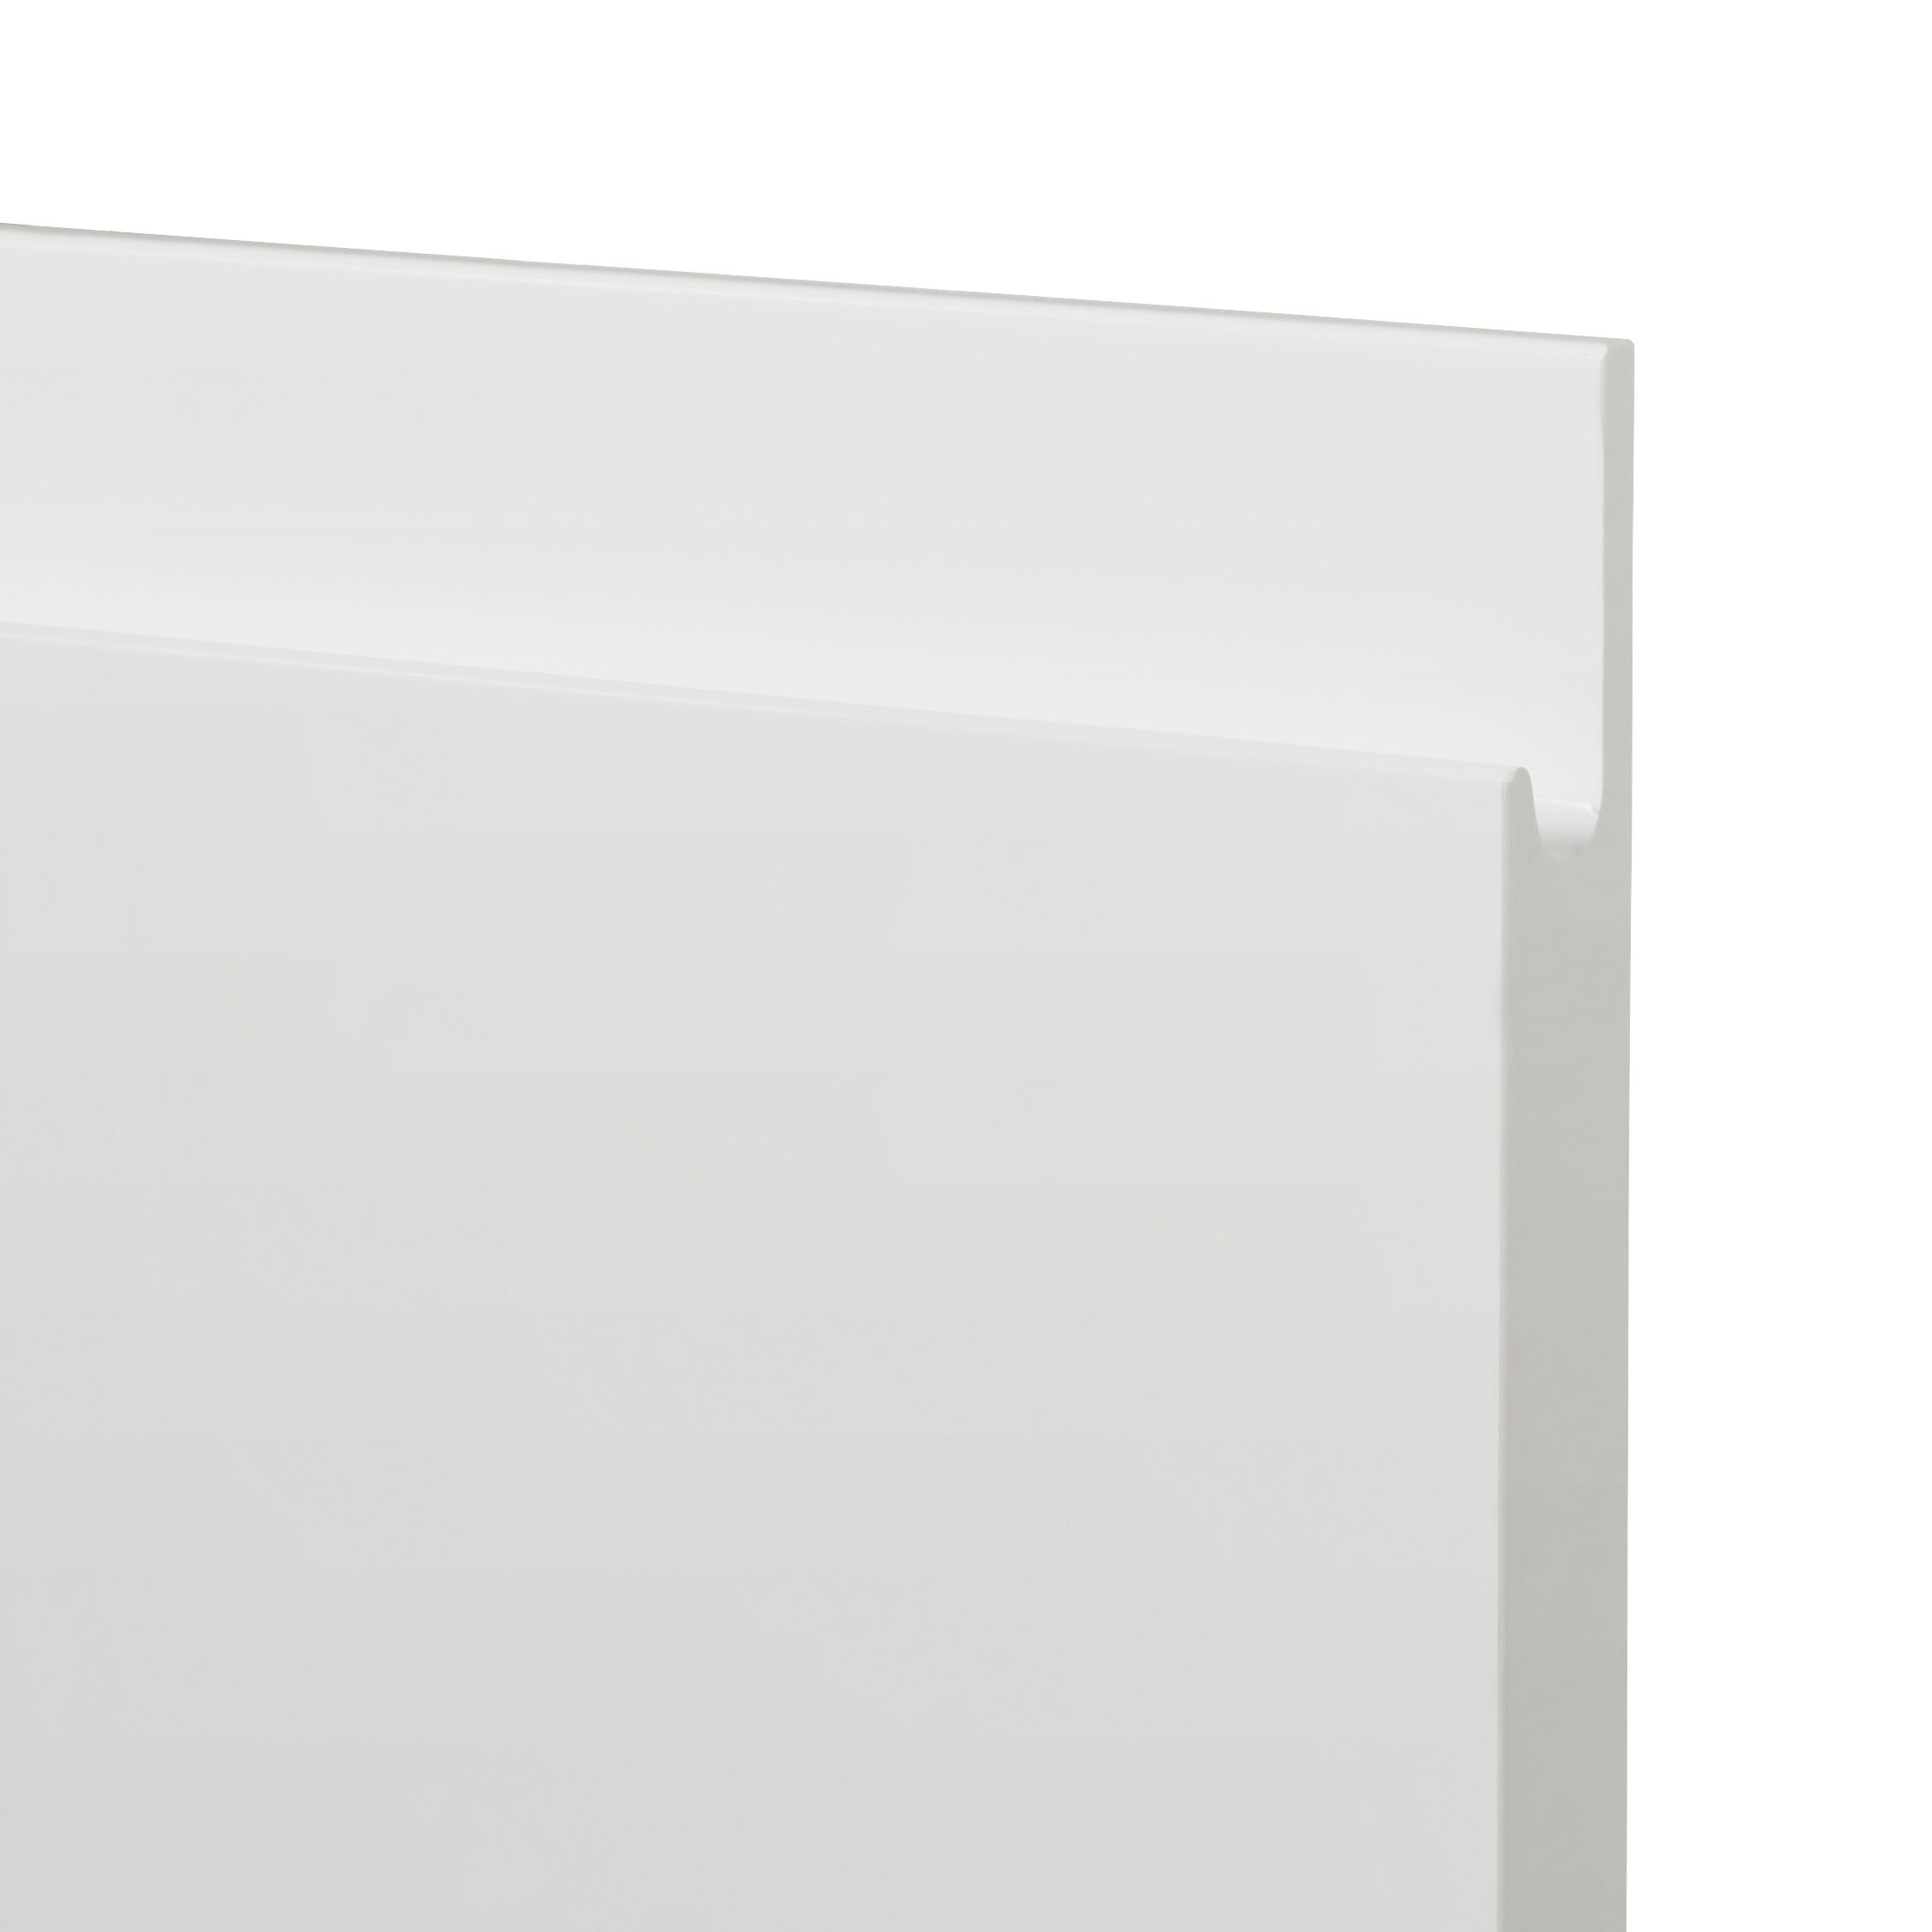 GoodHome Garcinia Gloss white integrated handle Larder Cabinet door (W)500mm (H)1287mm (T)19mm